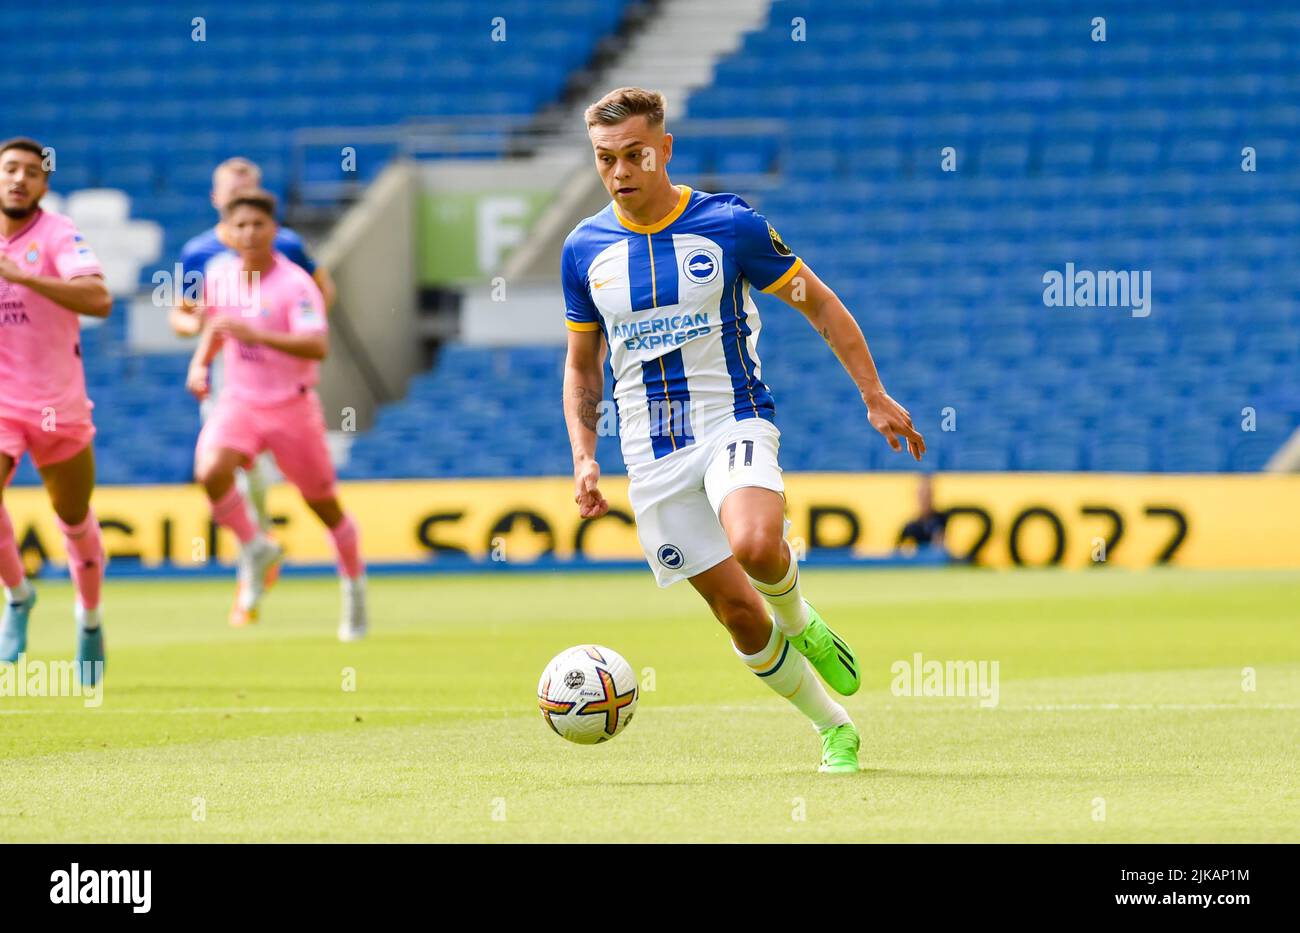 Leandro Trossard of Brighton during the Pre Season friendly match between Brighton and Hove Albion and Espanyol at  the American Express Community Stadium, Brighton, UK - 30th July 2022  Editorial use only. No merchandising. For Football images FA and Premier League restrictions apply inc. no internet/mobile usage without FAPL license - for details contact Football Dataco Stock Photo